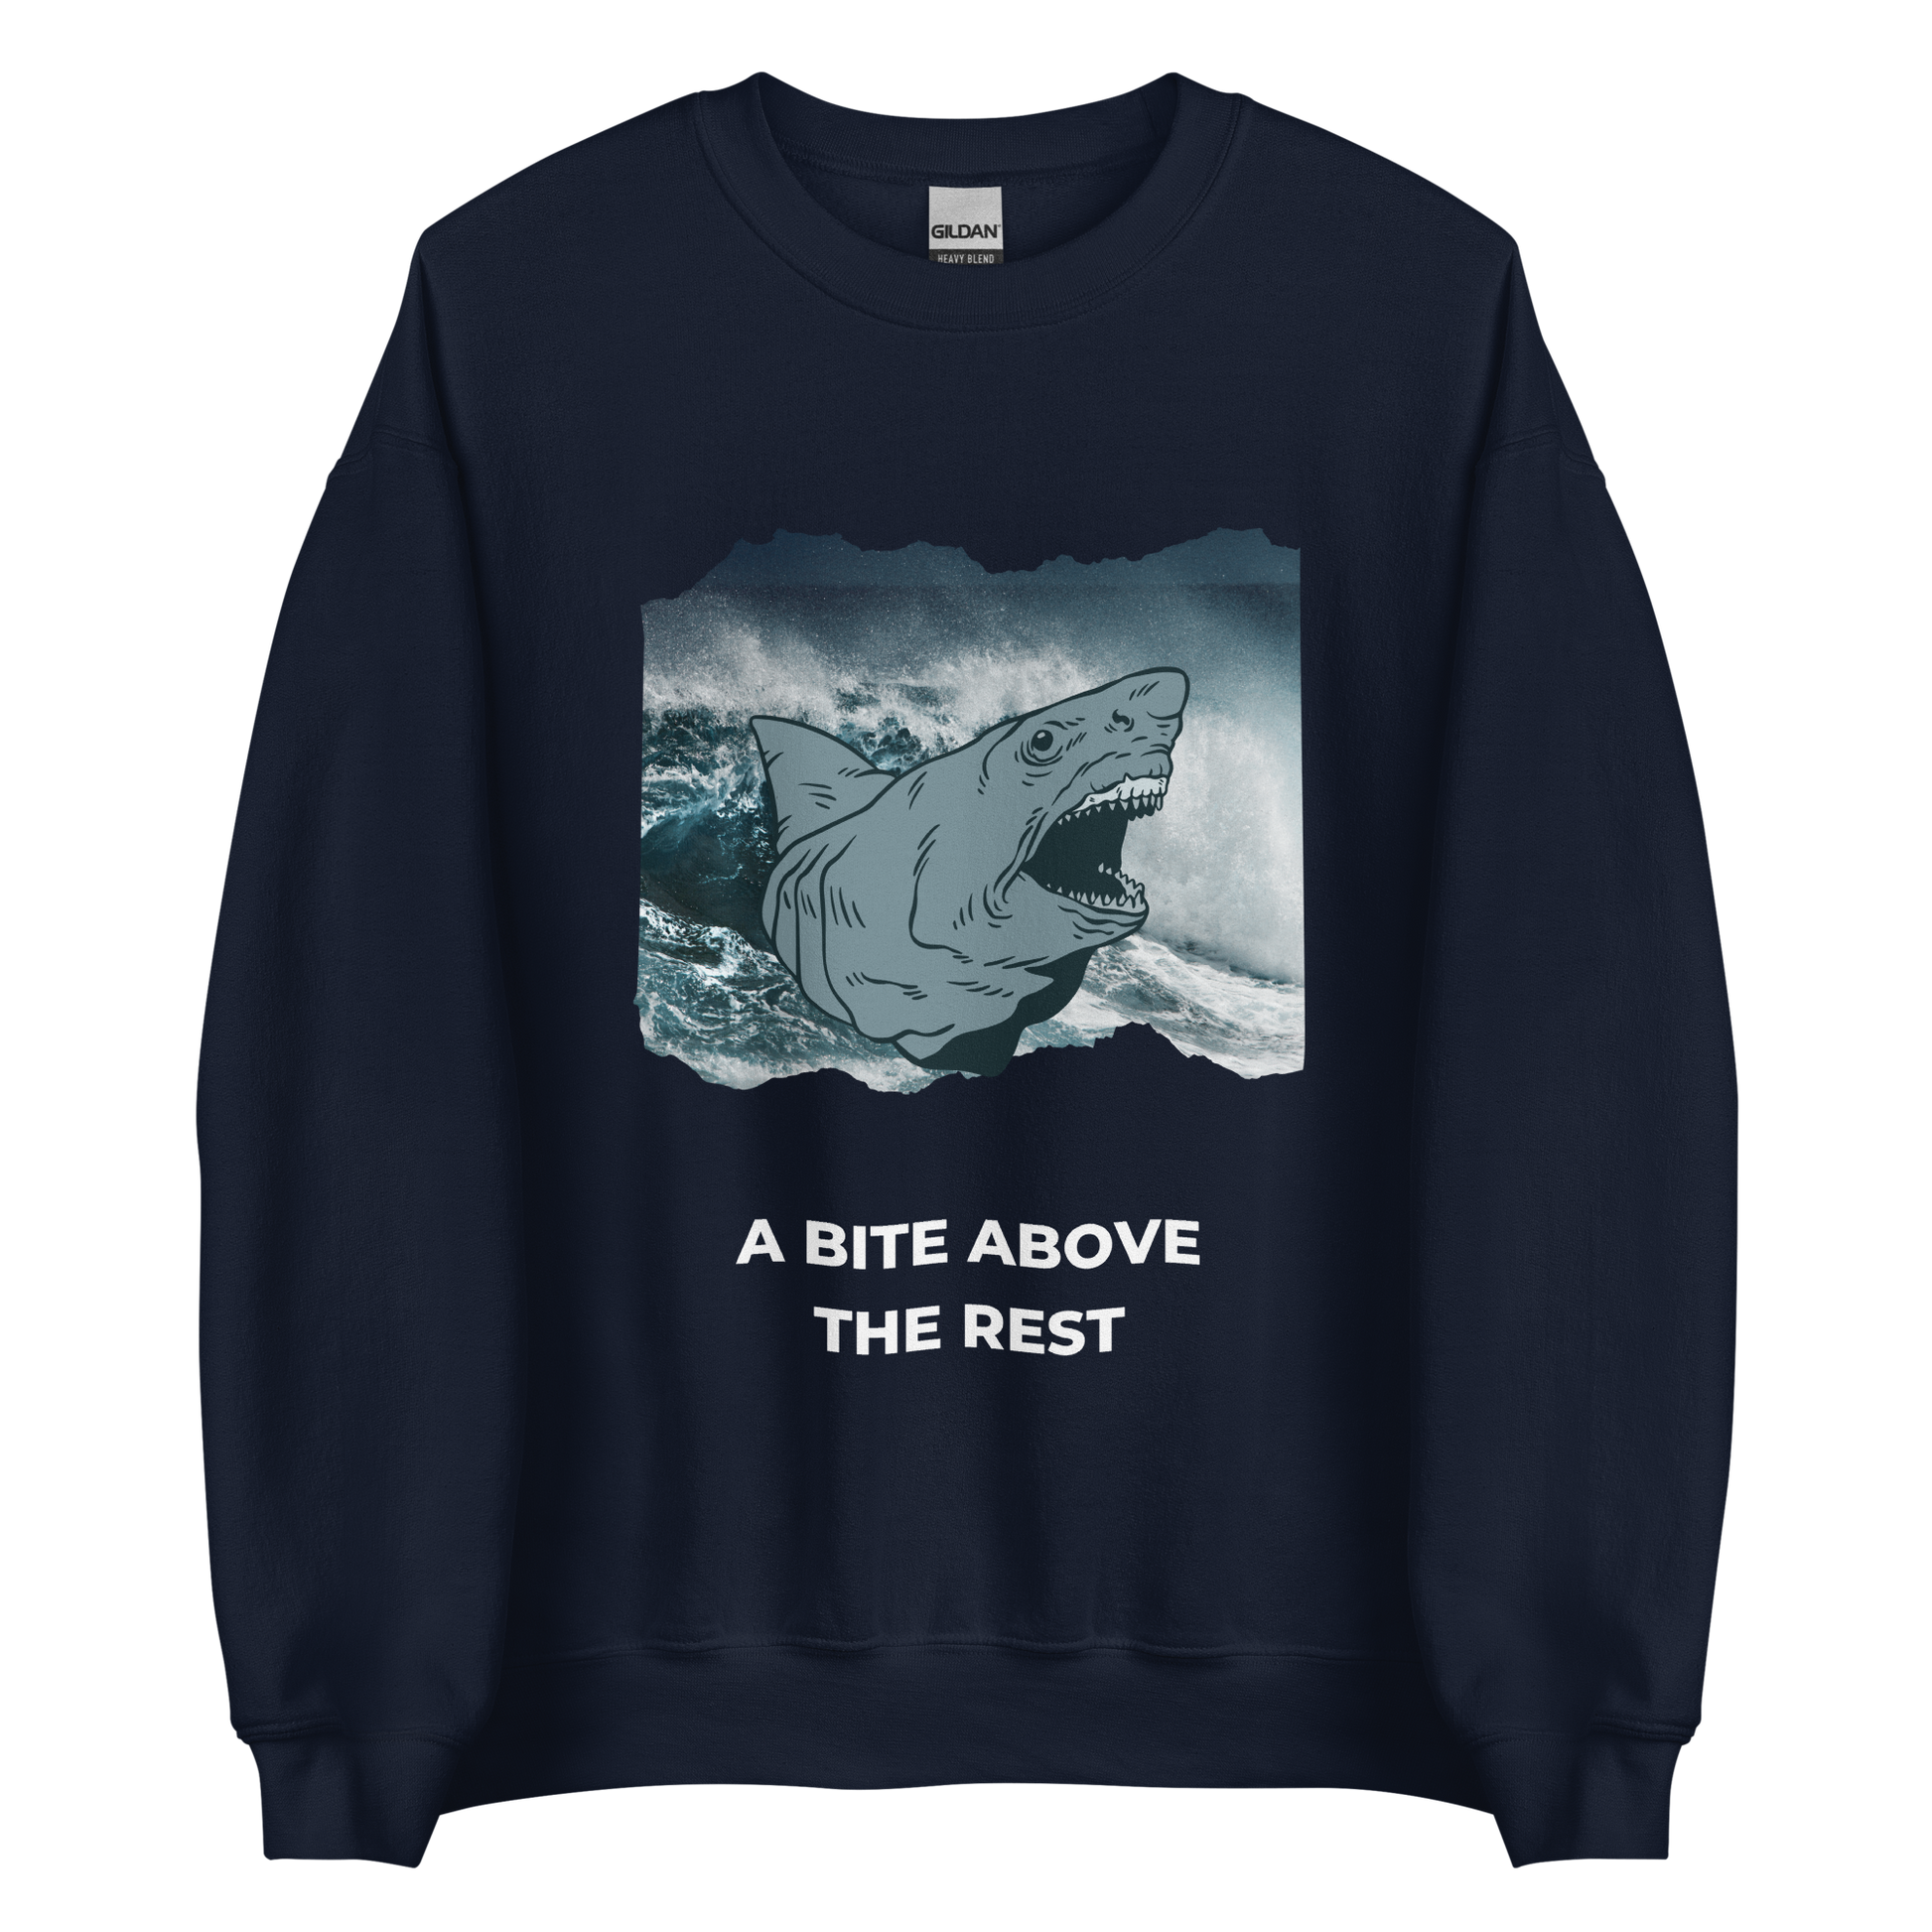 Navy Megalodon Sweatshirt featuring the 'A Bite Above the Rest' graphic on the chest - Funny Graphic Megalodon Sweatshirts - Boozy Fox